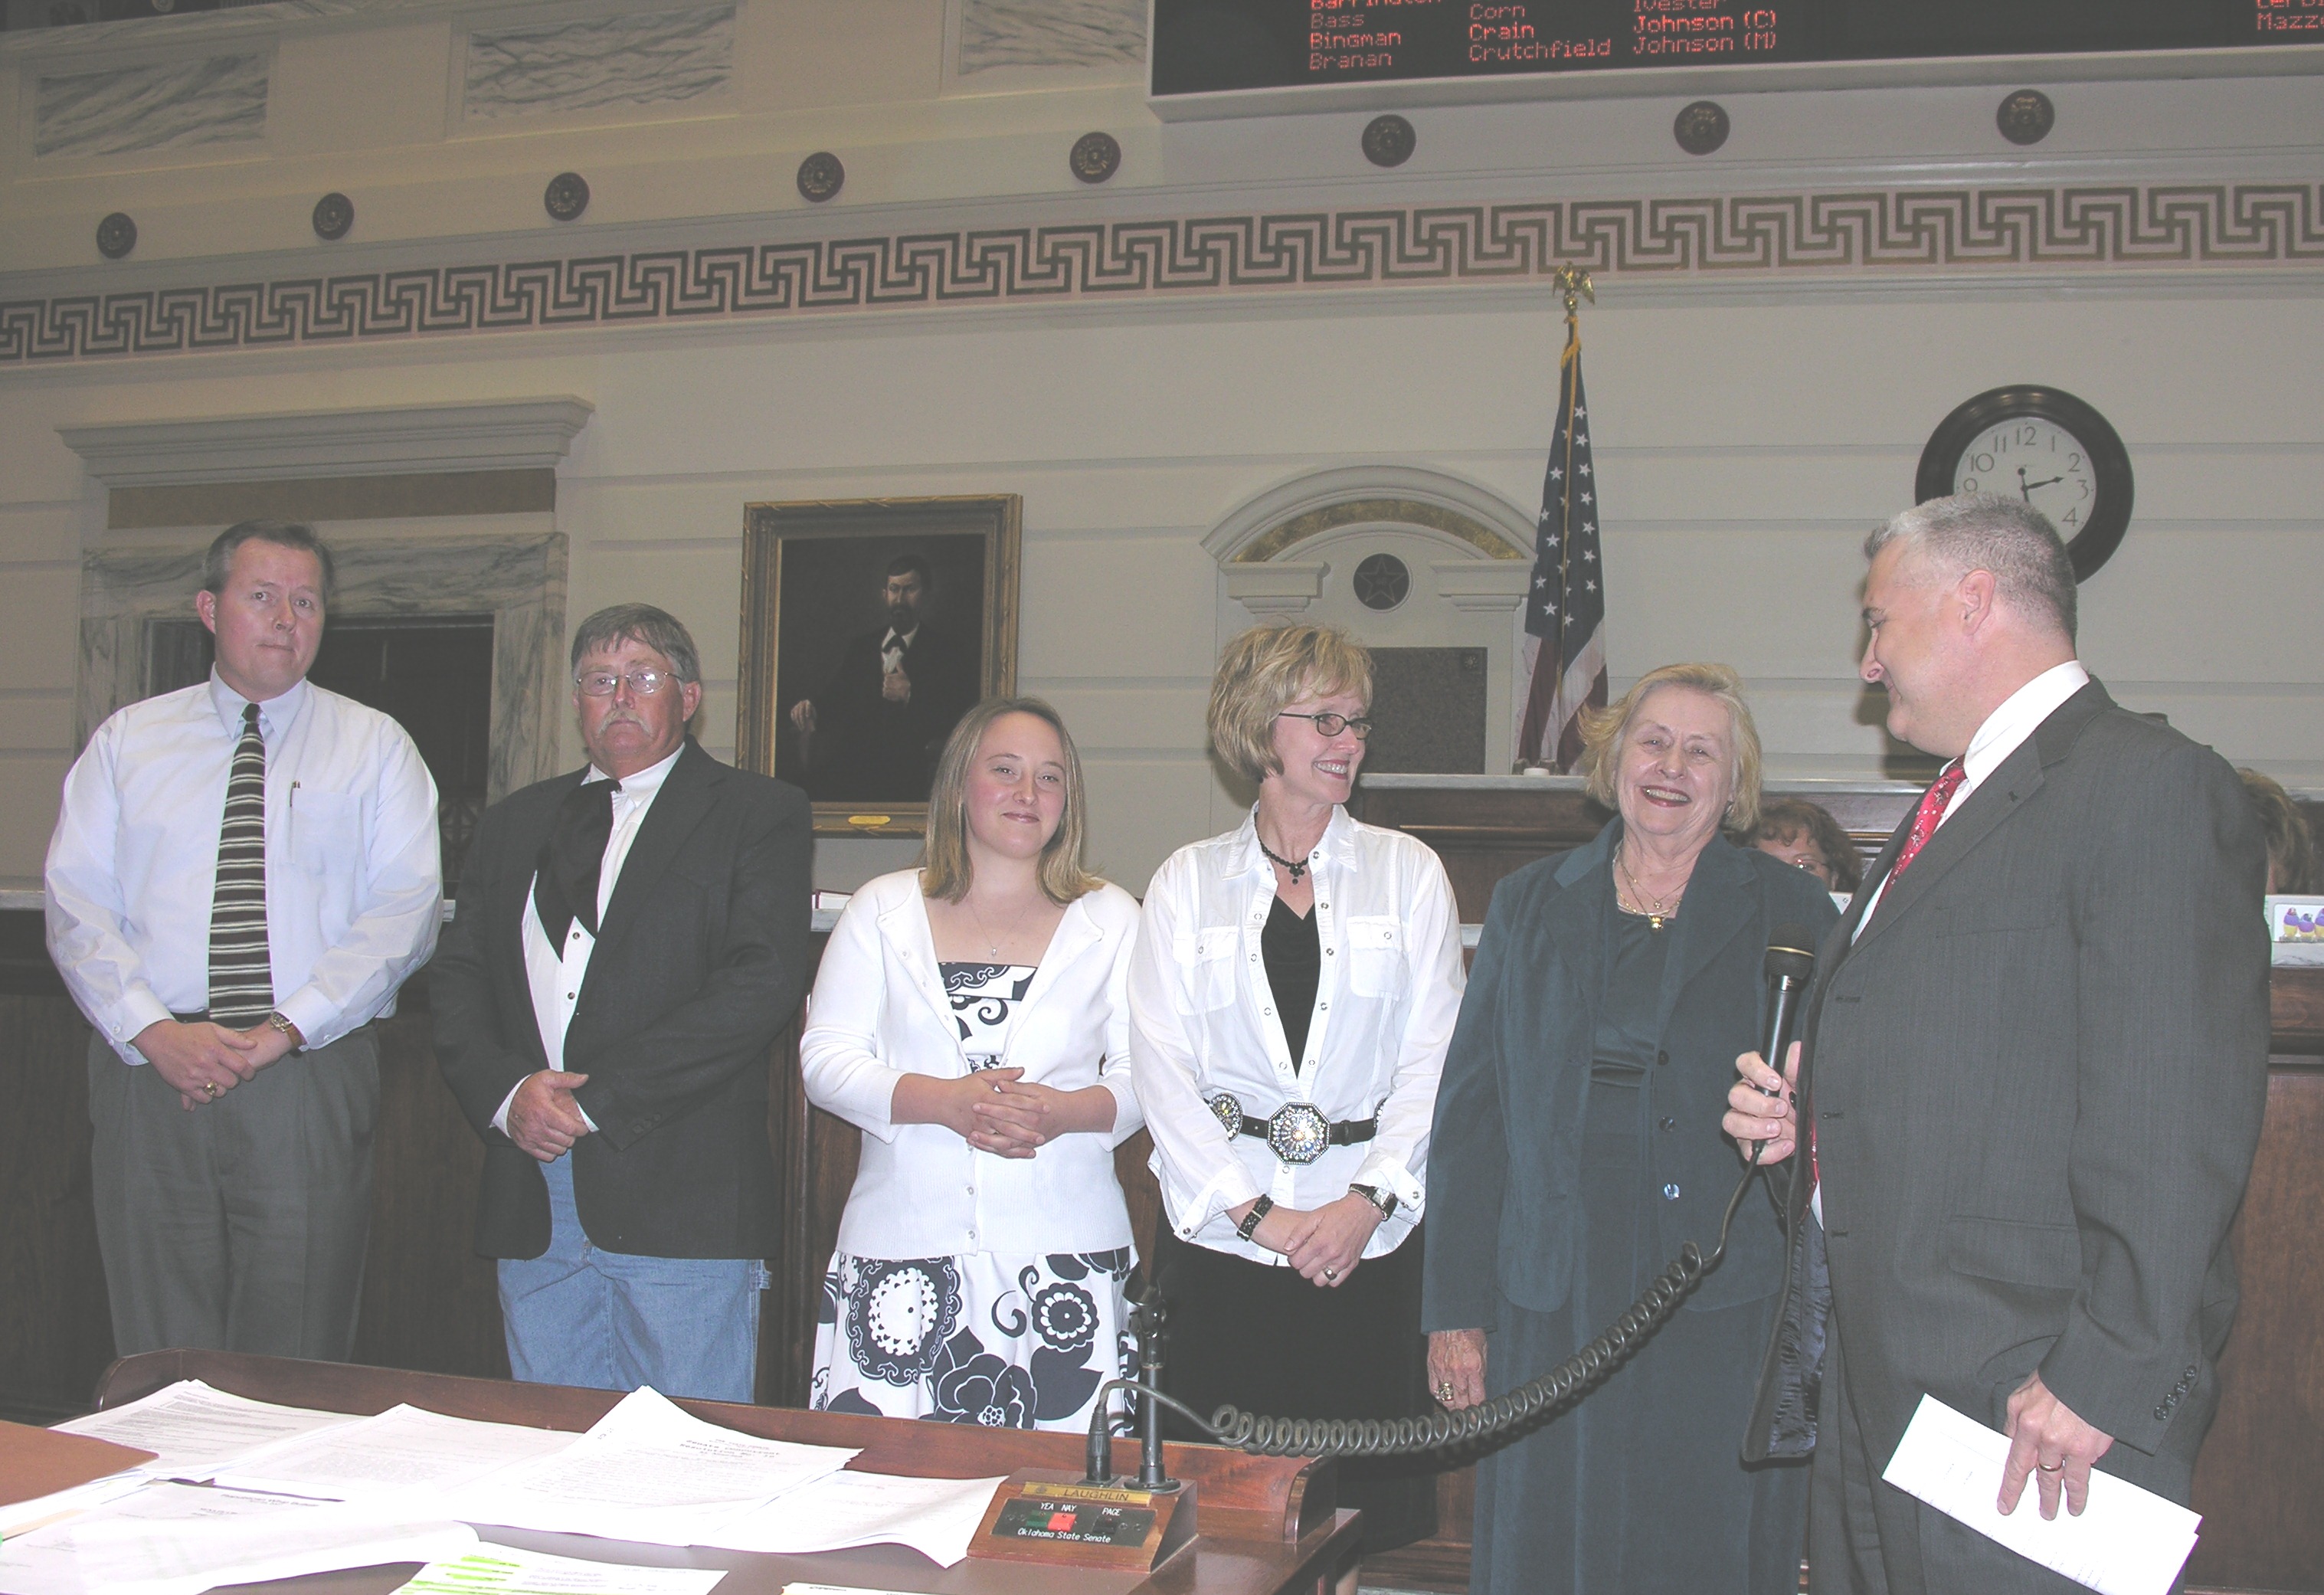 Robbie Kerr and members of the Kerr family are introduced to the Senate by Sen. Mike Schulz